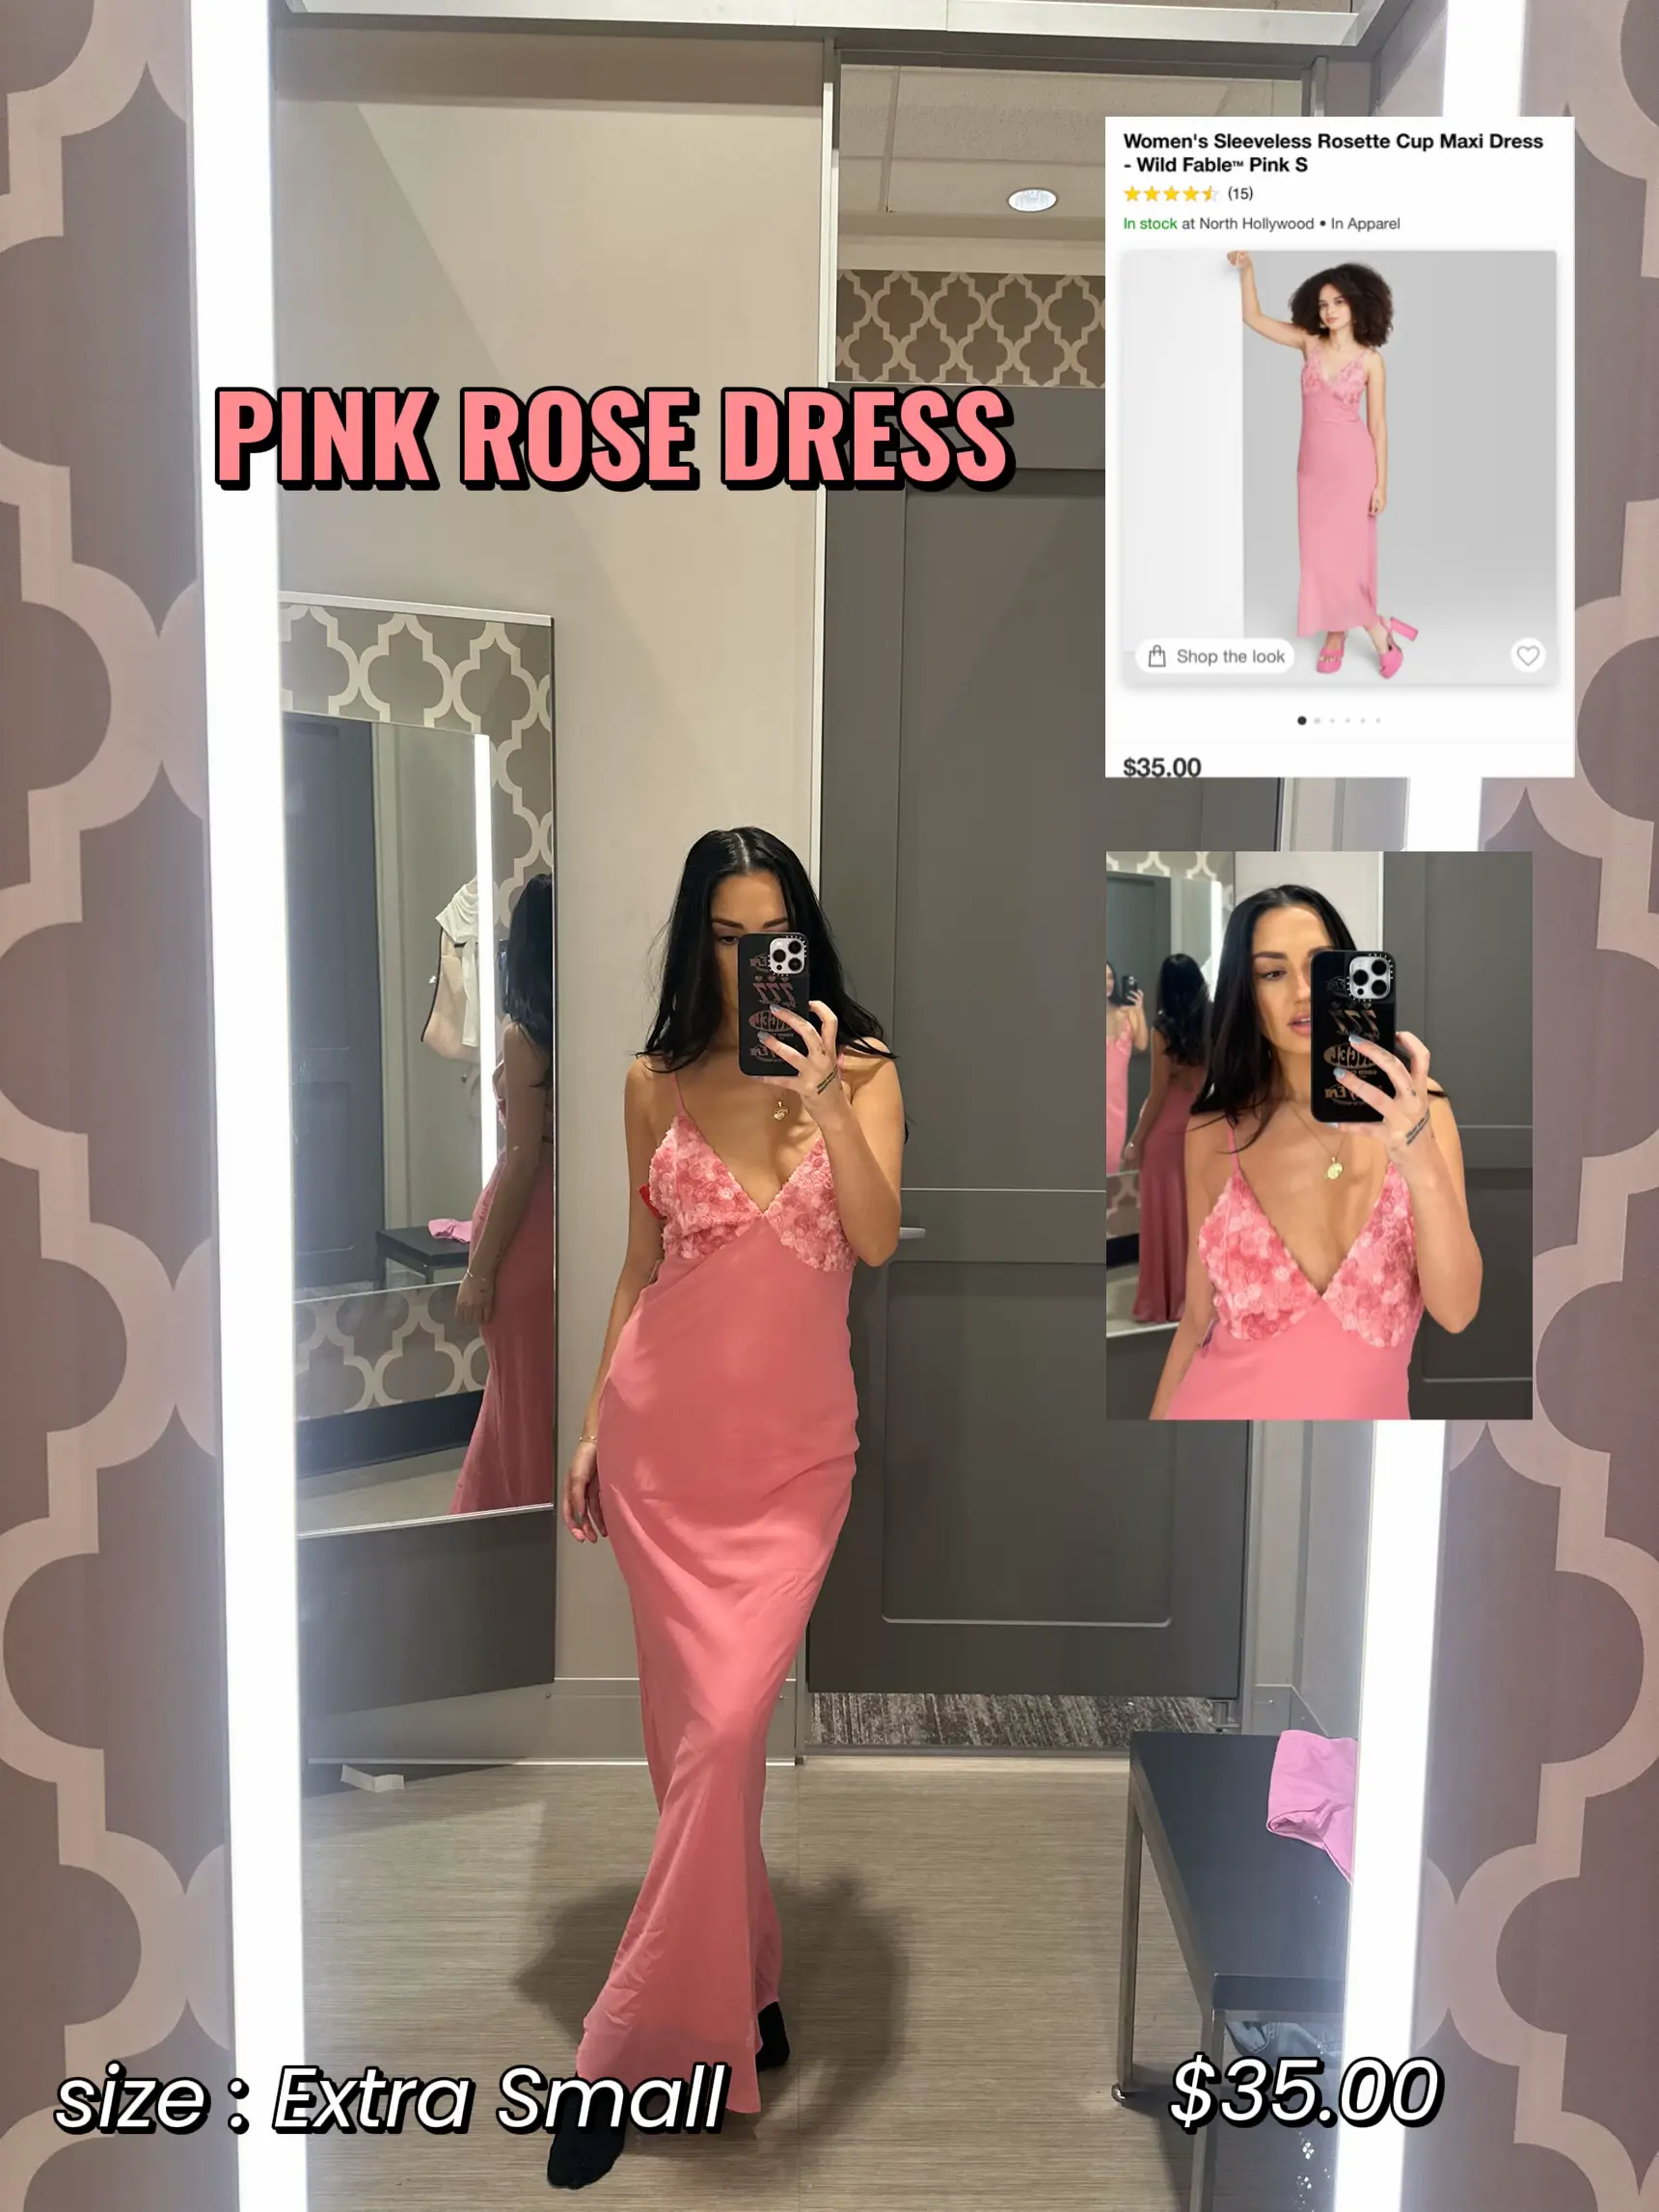 chic pink fashion outfits from target - Lemon8 Search